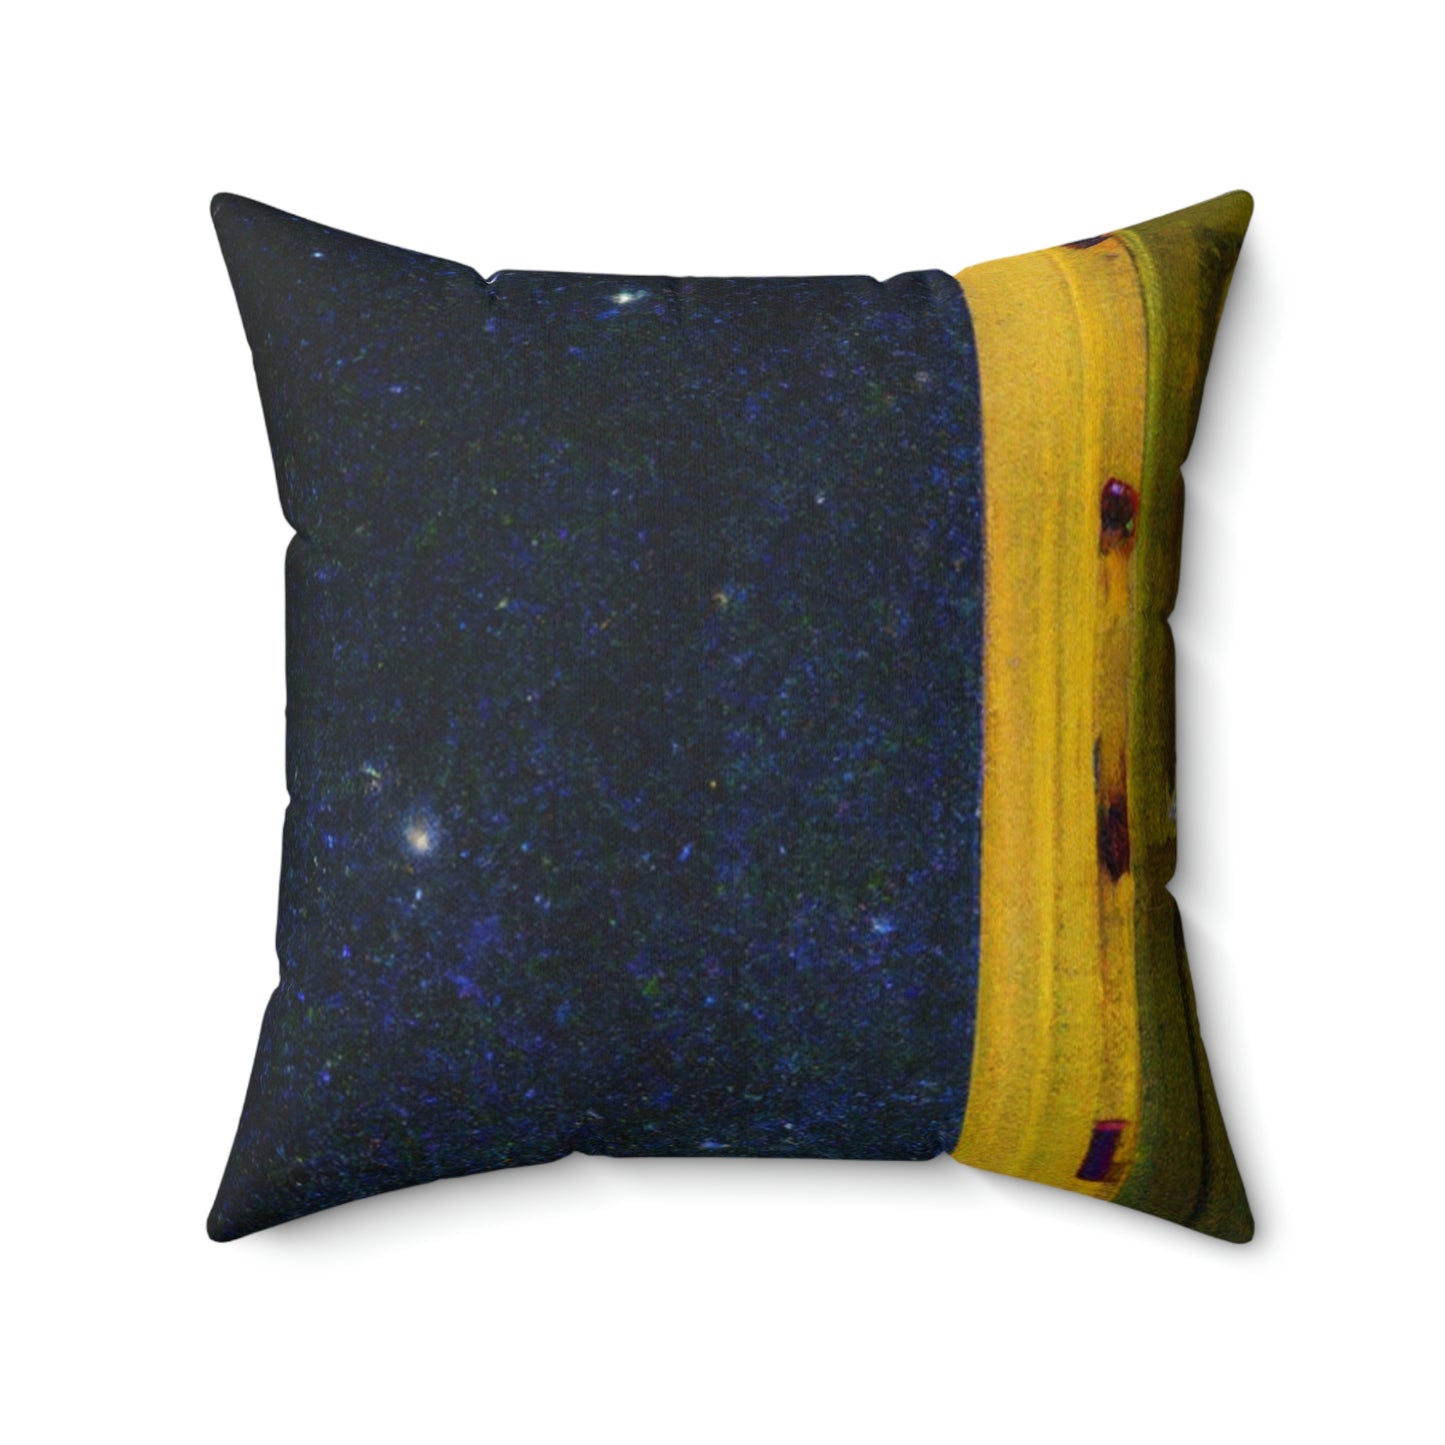 The Heavenly Threshold - The Alien Square Pillow